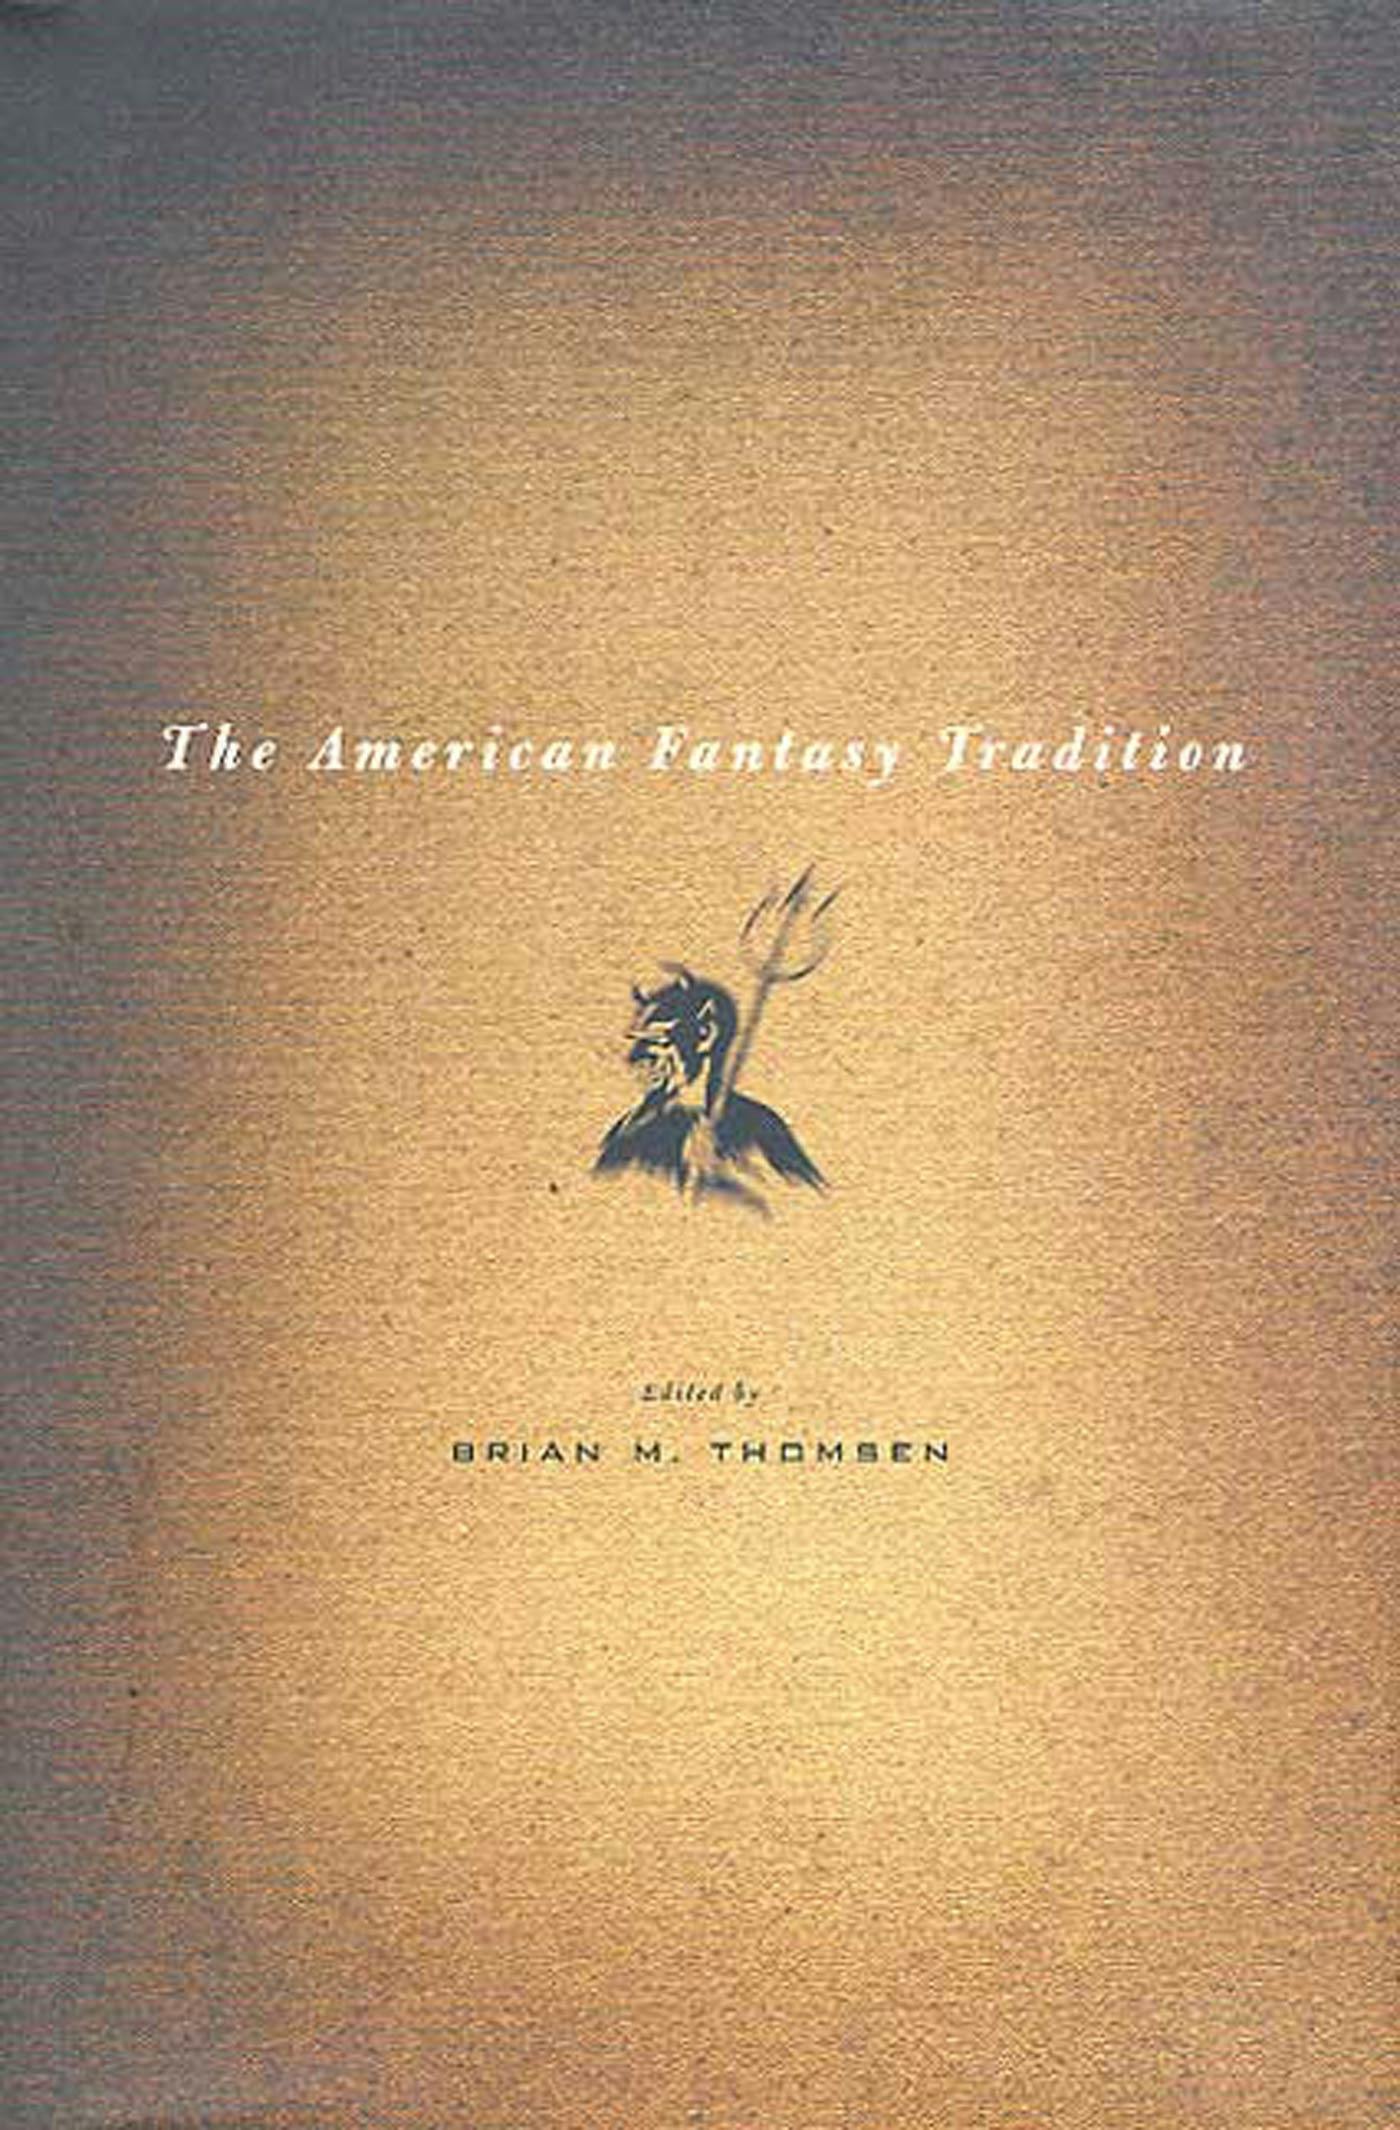 Cover for the book titled as: The American Fantasy Tradition